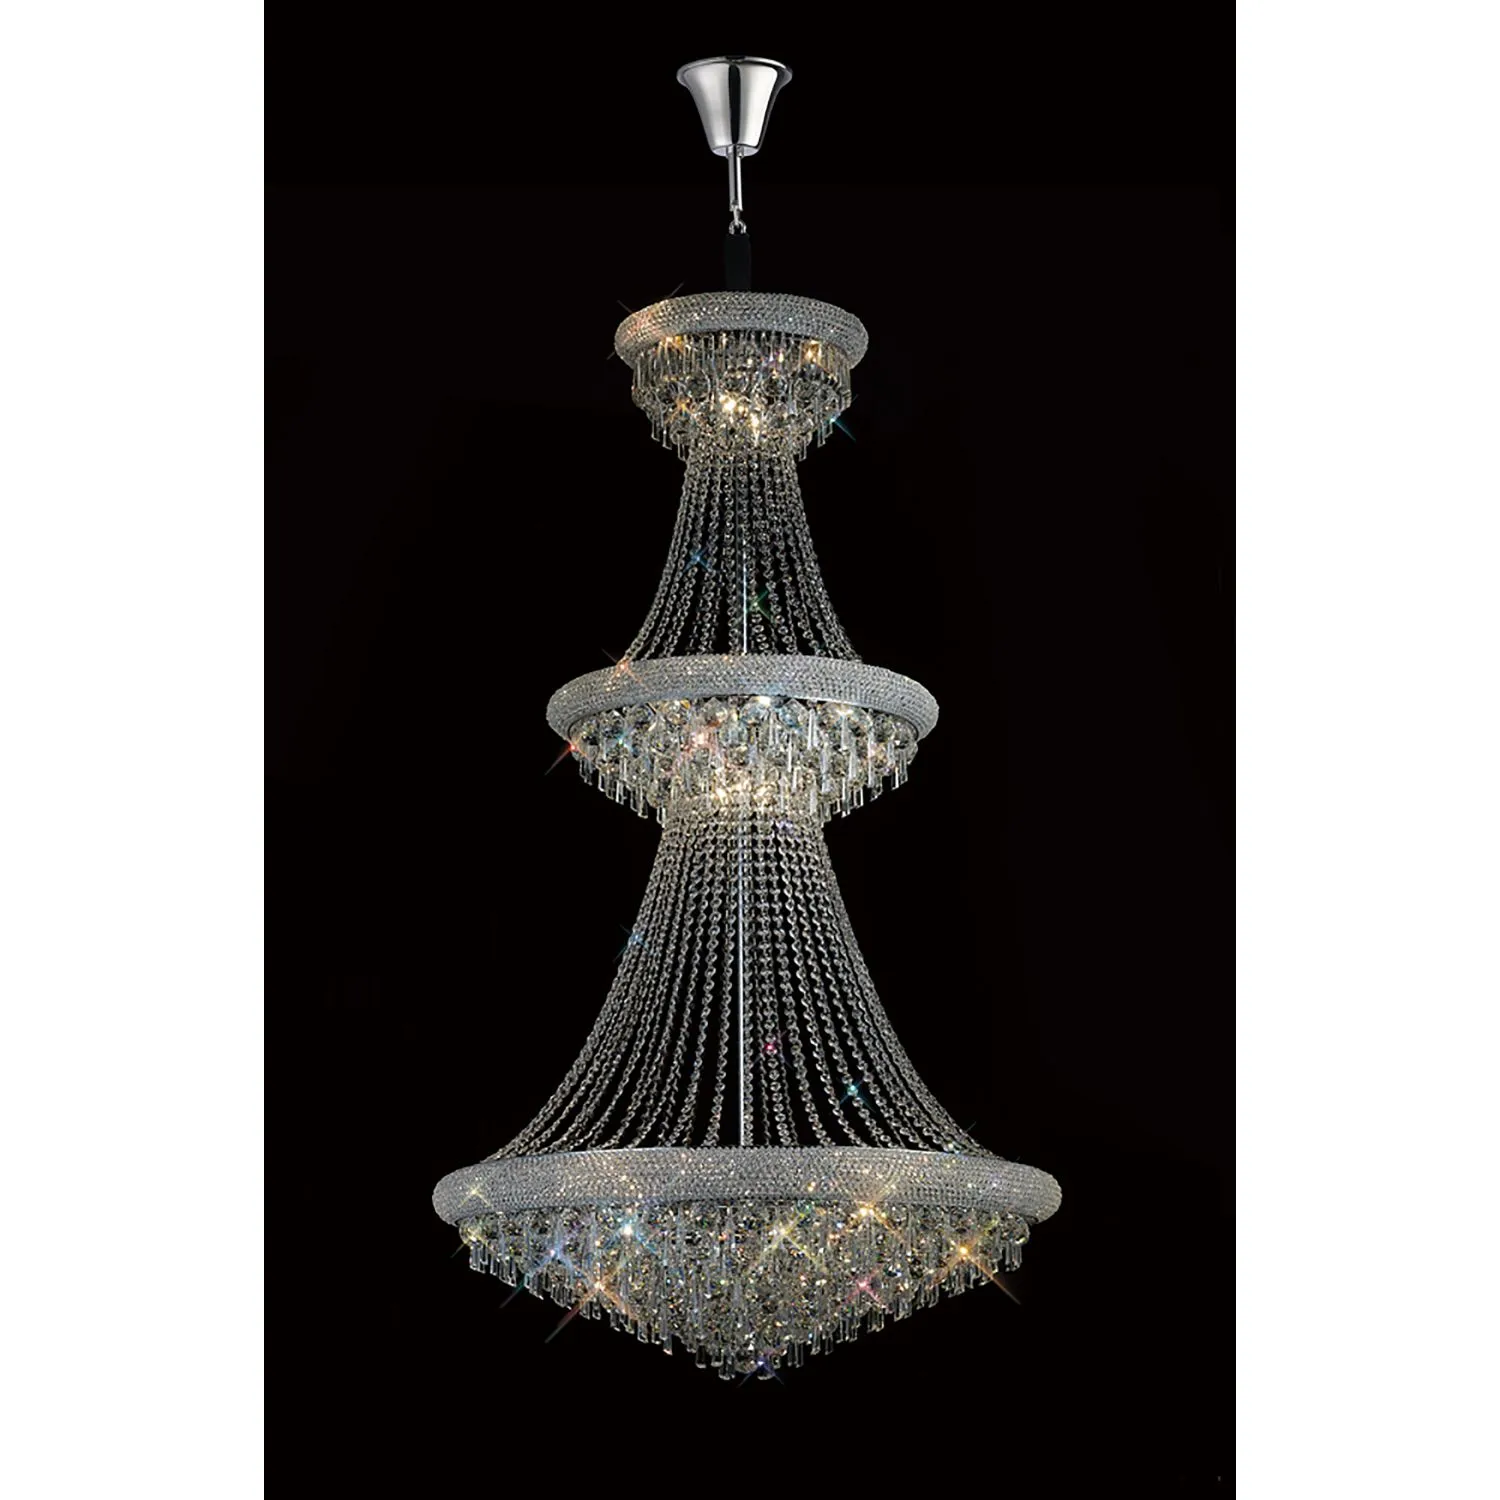 Alexandra Pendant 3 Tier 29 Light E14 Polished Chrome Crystal (Pallet Shipment Only), (ITEM REQUIRES CONSTRUCTION CONNECTION) Item Weight: 64.8kg